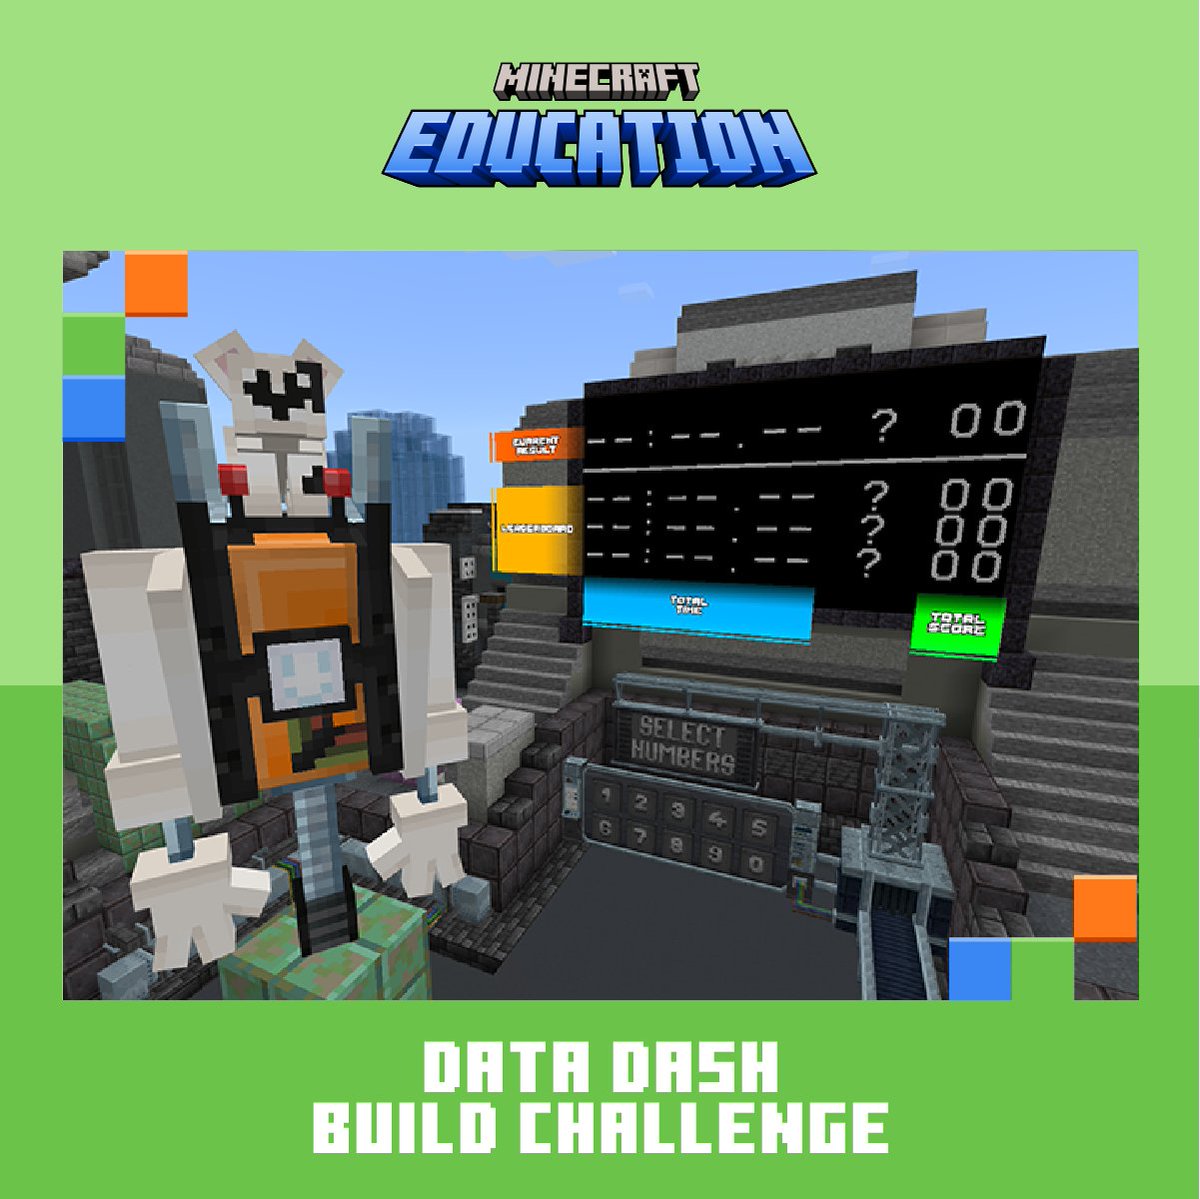 🎲 Students demonstrate their knowledge of #math facts with a fun quiz game, then get creative building math models and crafting flash cards in this Minecraft Education Build Challenge 📐 Download today at msft.it/6017cUlaR #MinecraftEdu #GBL